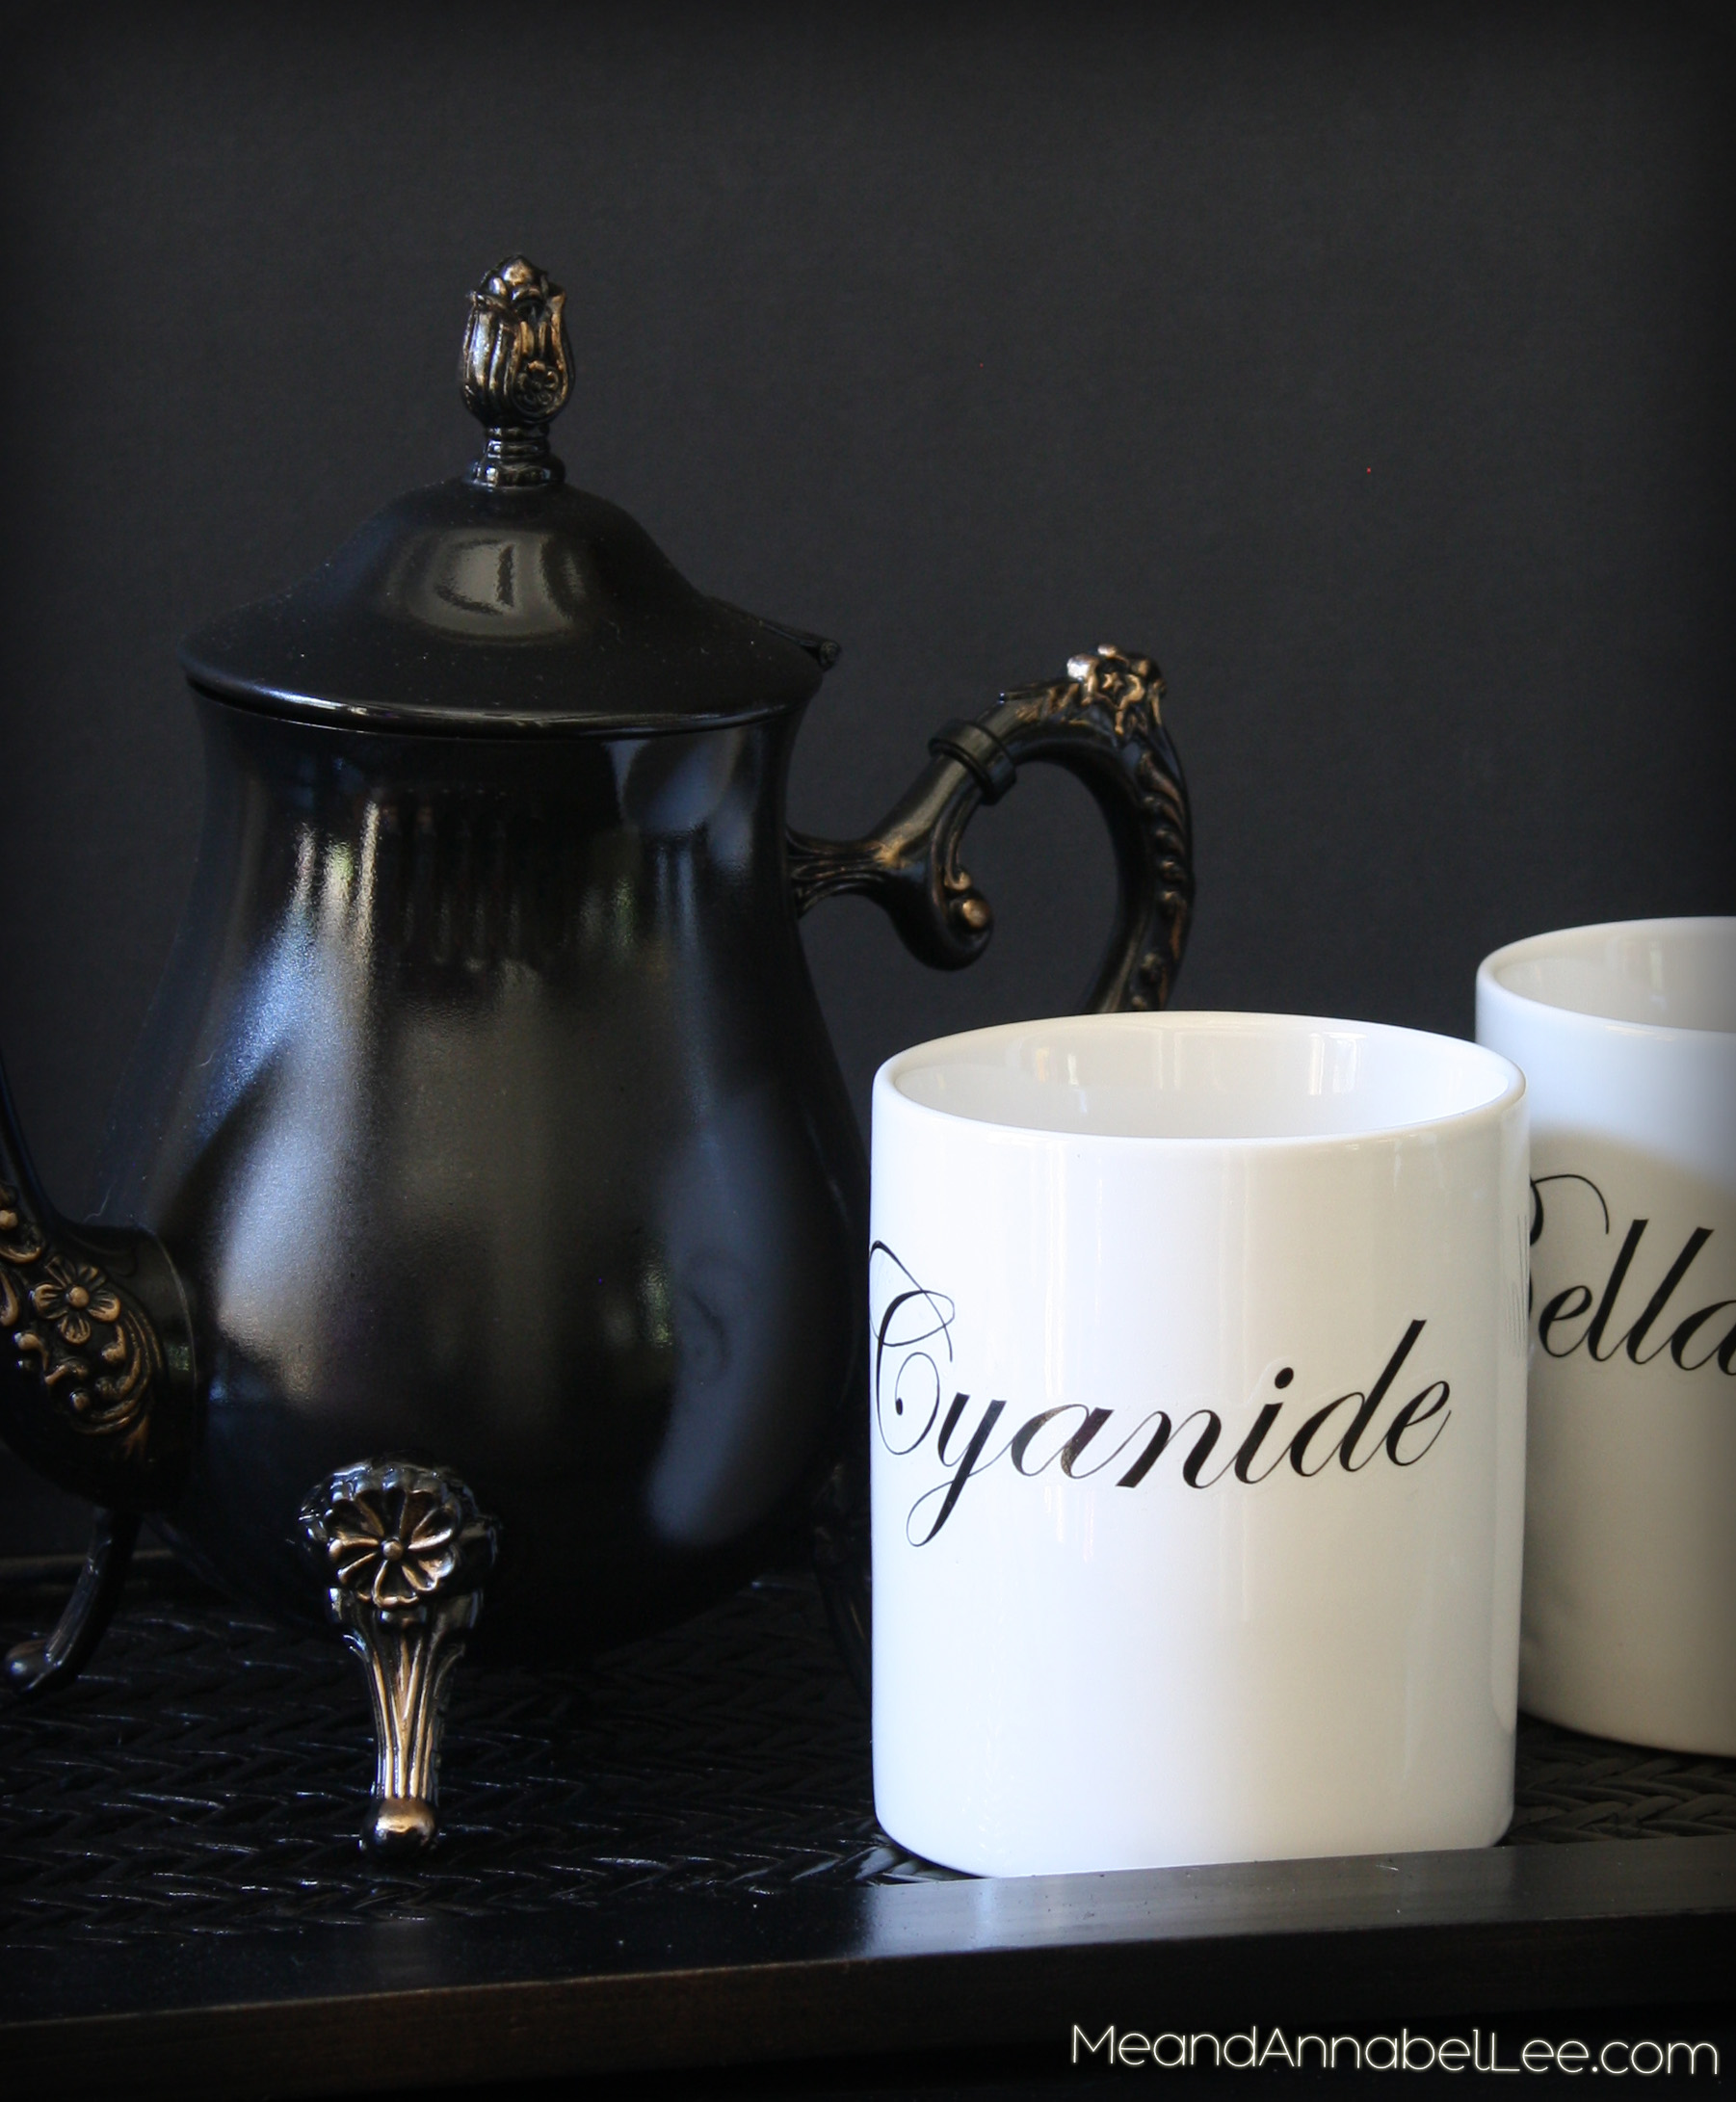 Cyanide Belladonna Poison coffee mug or tea cup - How to transfer an image using a waterslide decal... Victorian Gothic Decor | Me and Annabel Lee - Gothic Alternative Blog